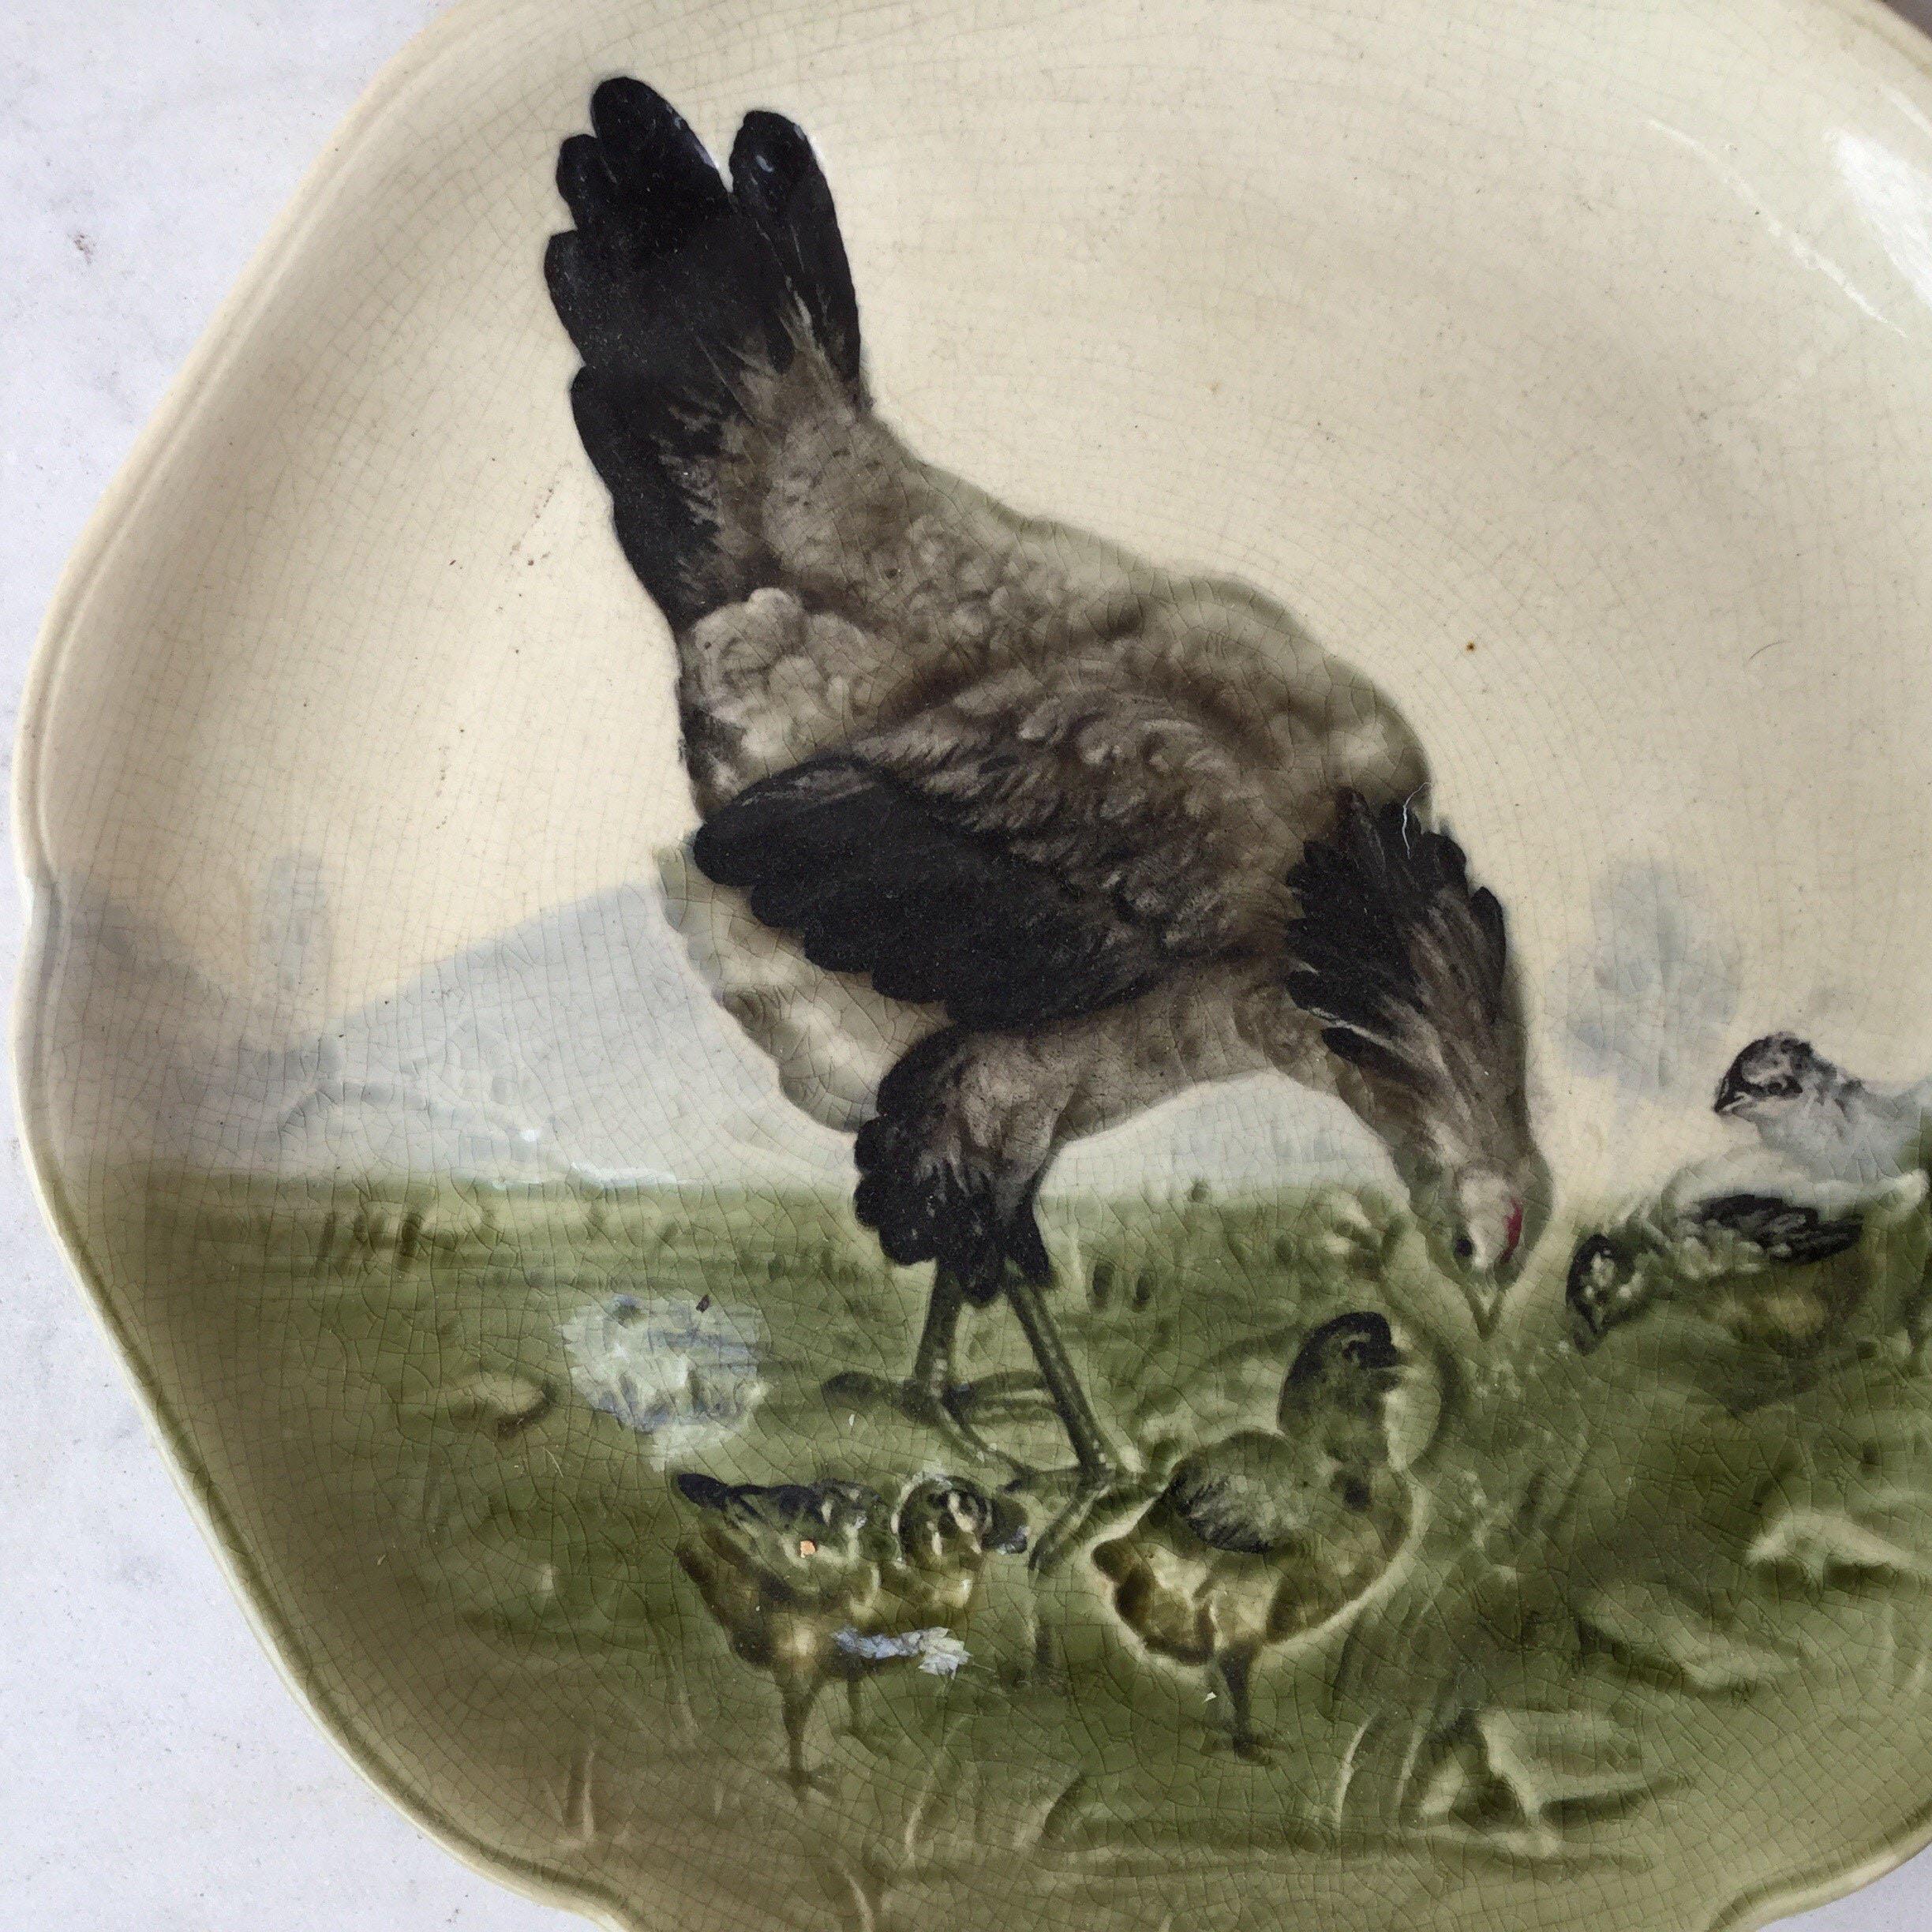 Majolica plate with hen and chicks signed Hippolyte Boulenger Choisy le Roi, circa 1890.
The manufacture of Choisy le Roi was one of the most important manufacture at the end of 19th century, they produced very high quality ceramics of all kinds as